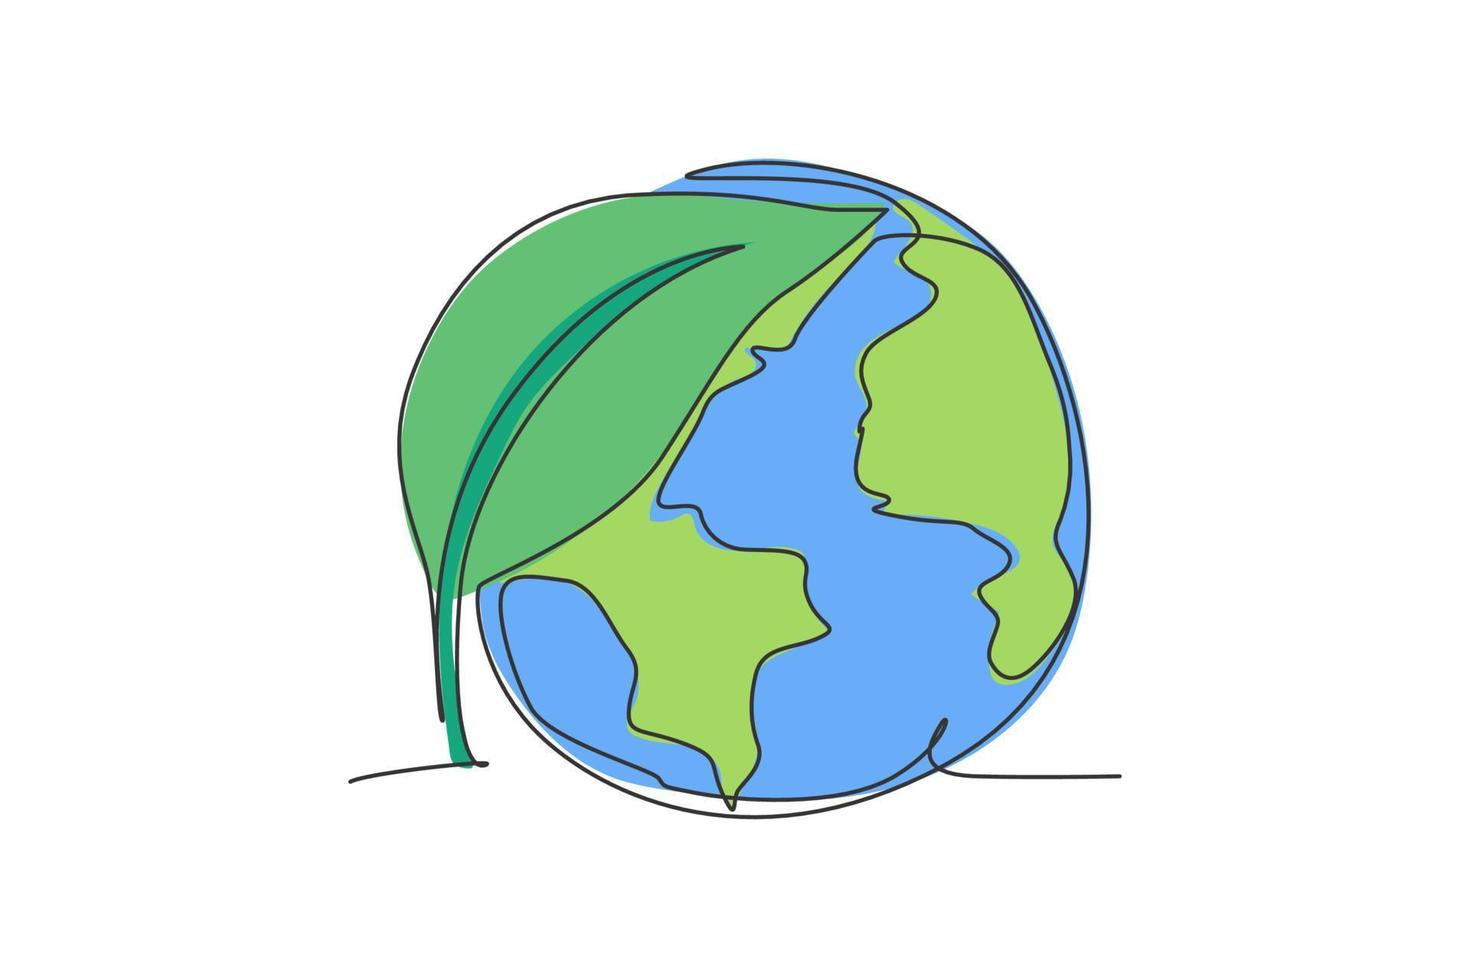 Green leaf on earth globe. Continuous one line drawing nature leaf minimalist vector illustration design on white background. Simple line modern graphic style. Hand drawn graphic natural concept